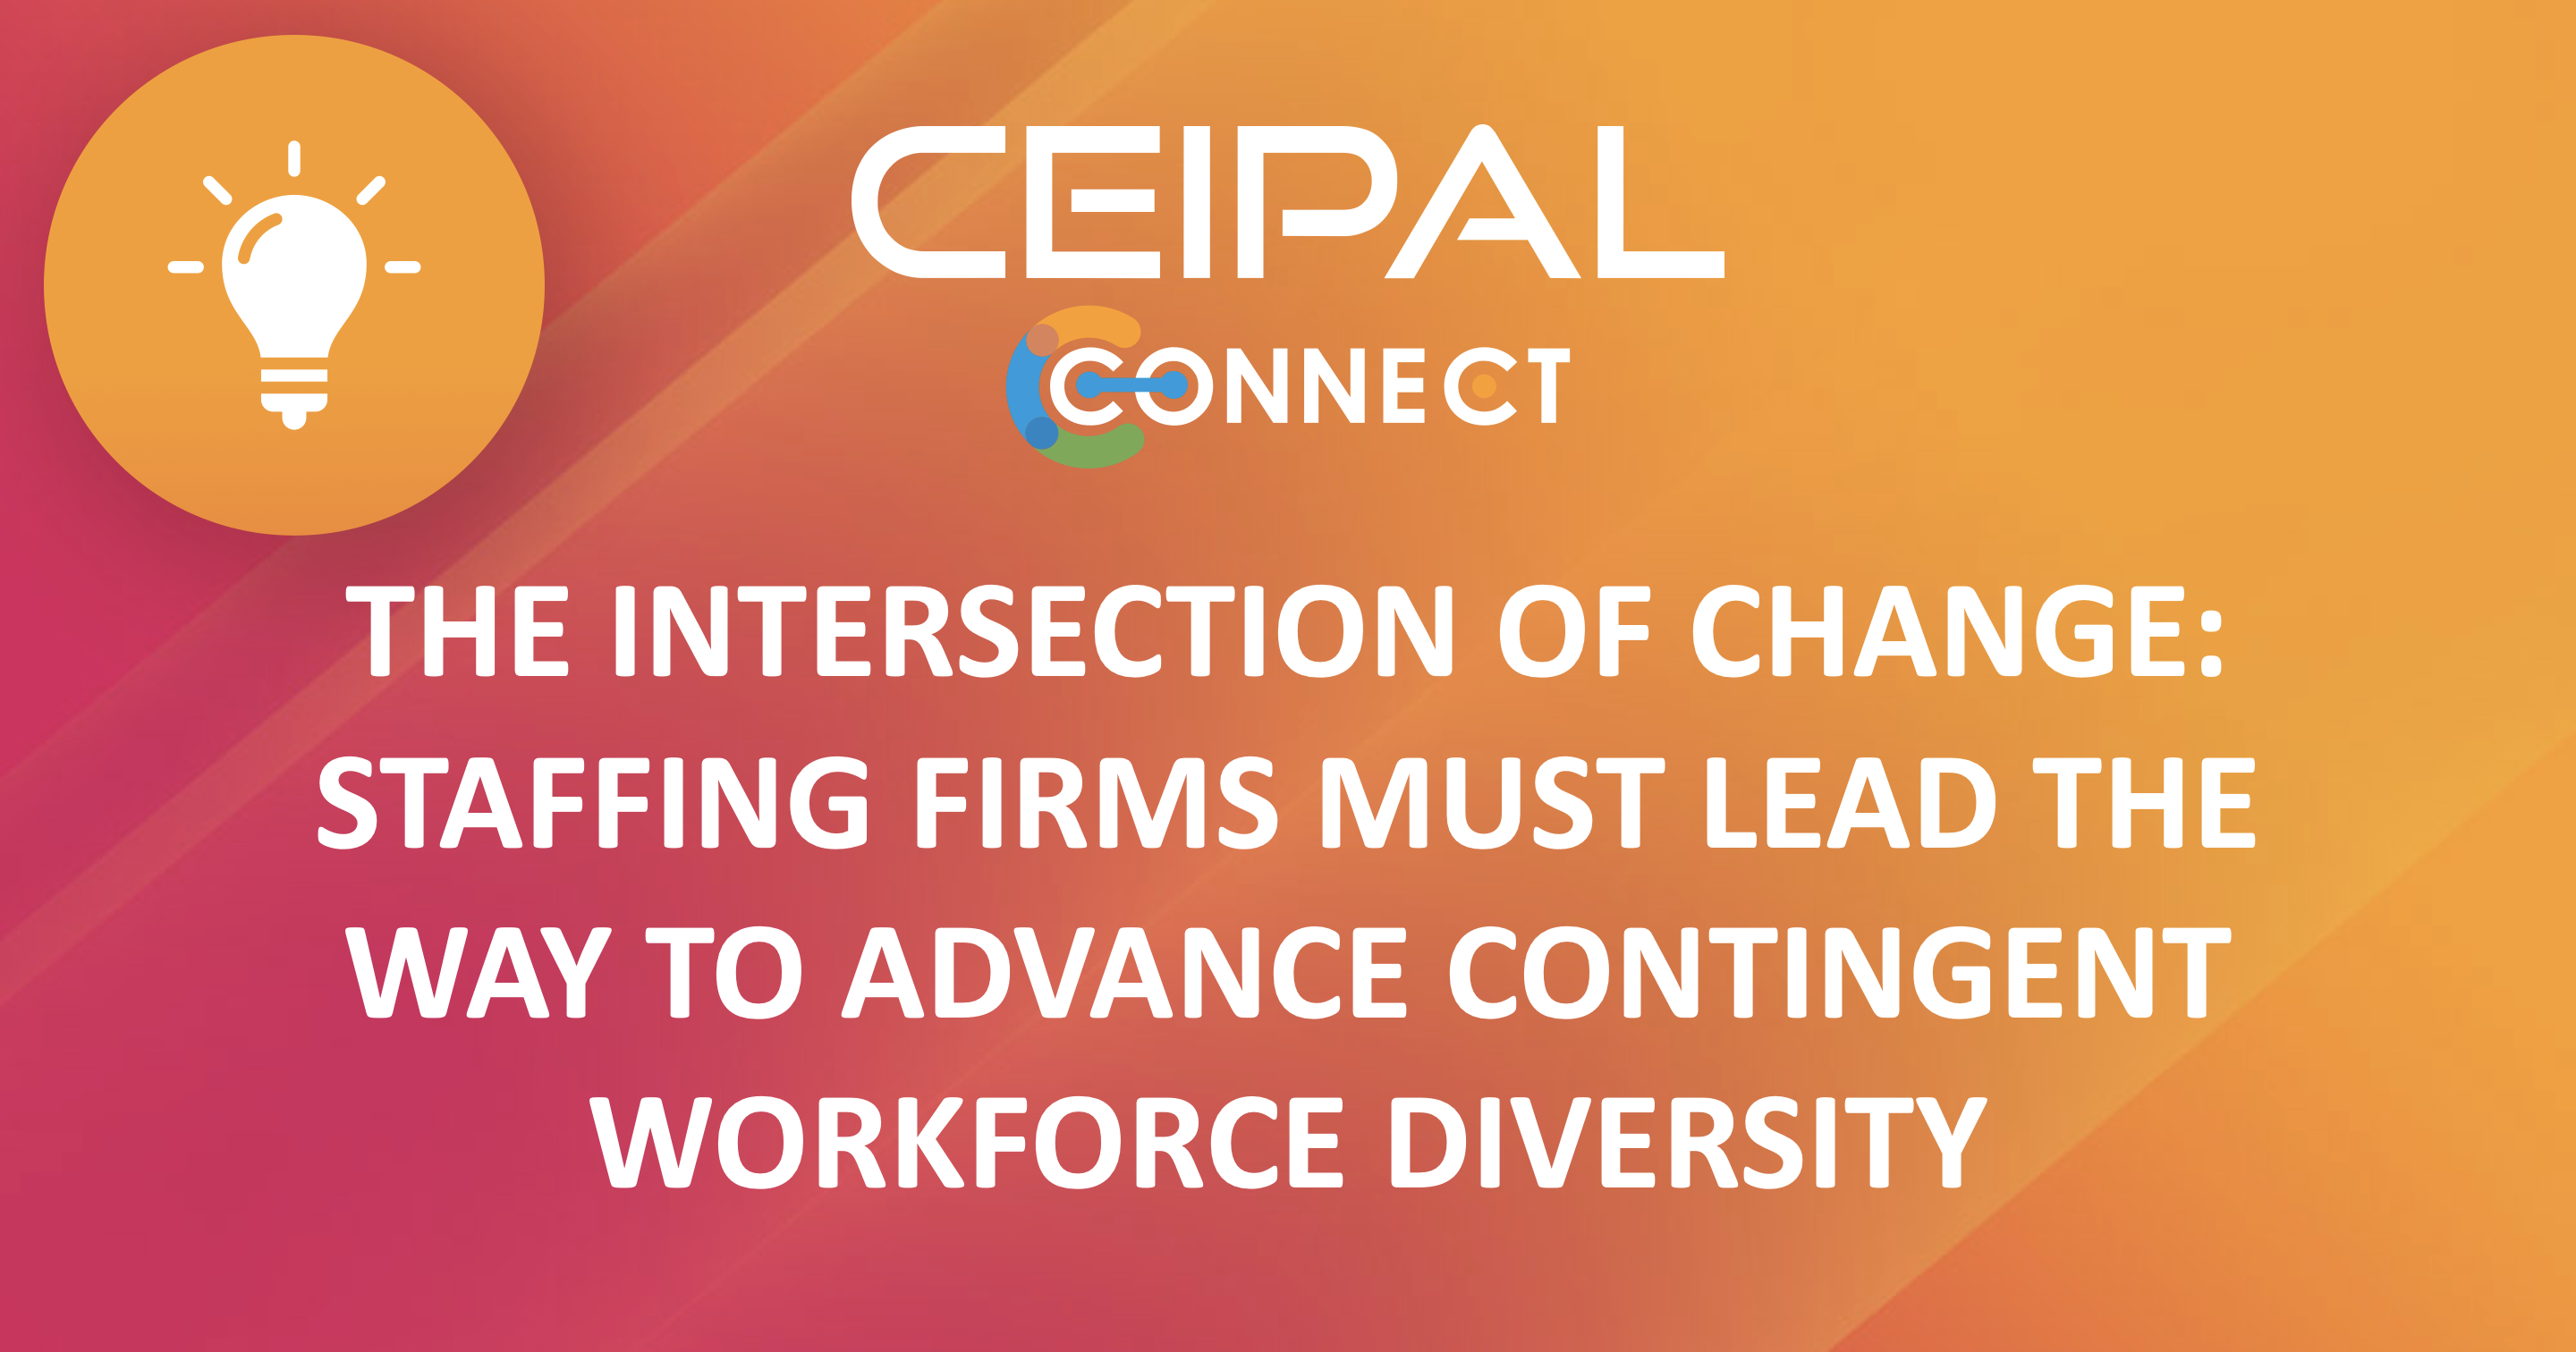 The Intersection of Change: Staffing Firms Must Lead the Way to Advance Contingent Workforce Diversity